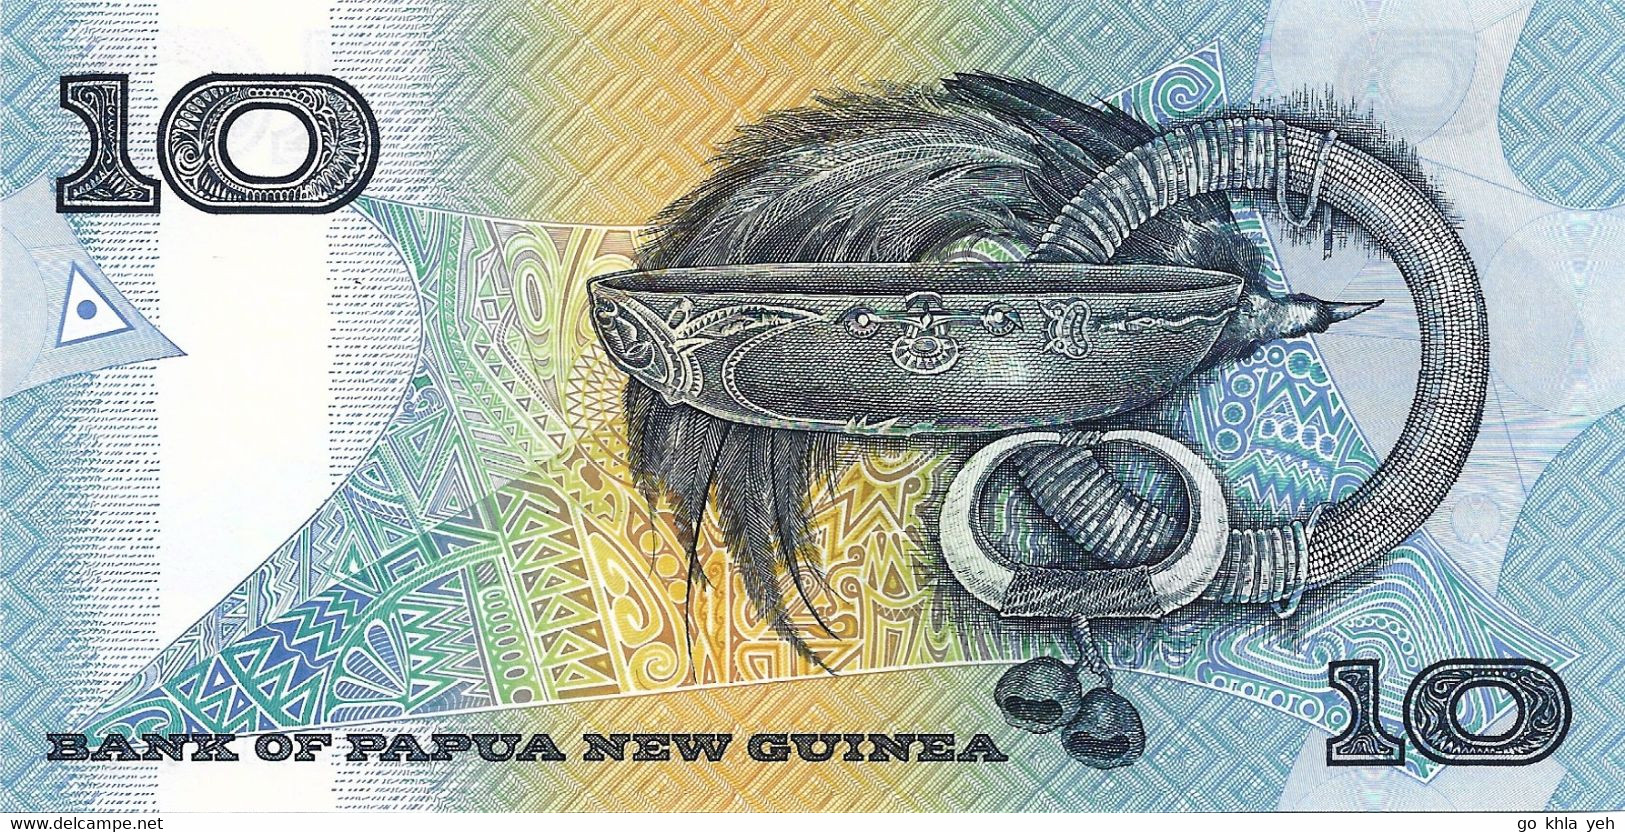 PAPOUASIE - NOUVELLE-GUINEE 1998 10 Kina - P.17a Neuf UNC - Papua New Guinea